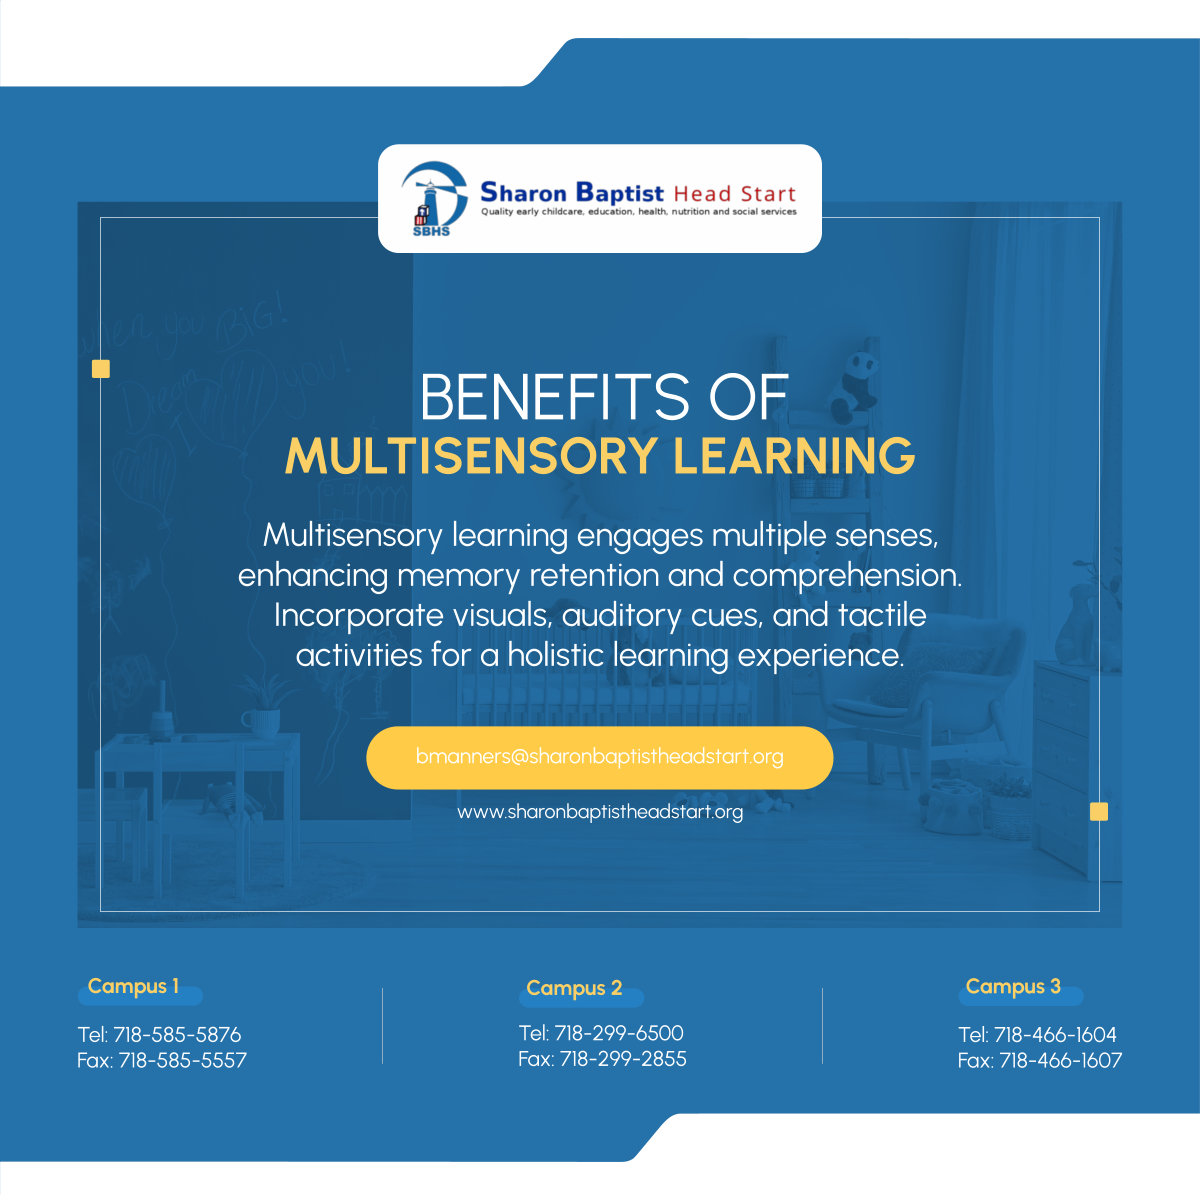 Explore the advantages of multisensory learning for improved memory and comprehension. Unlock your potential with engaging, multisensory educational approaches. 

#BronxNY #Childcare #MultisensoryLearning #MemoryRetention #HolisticEducation